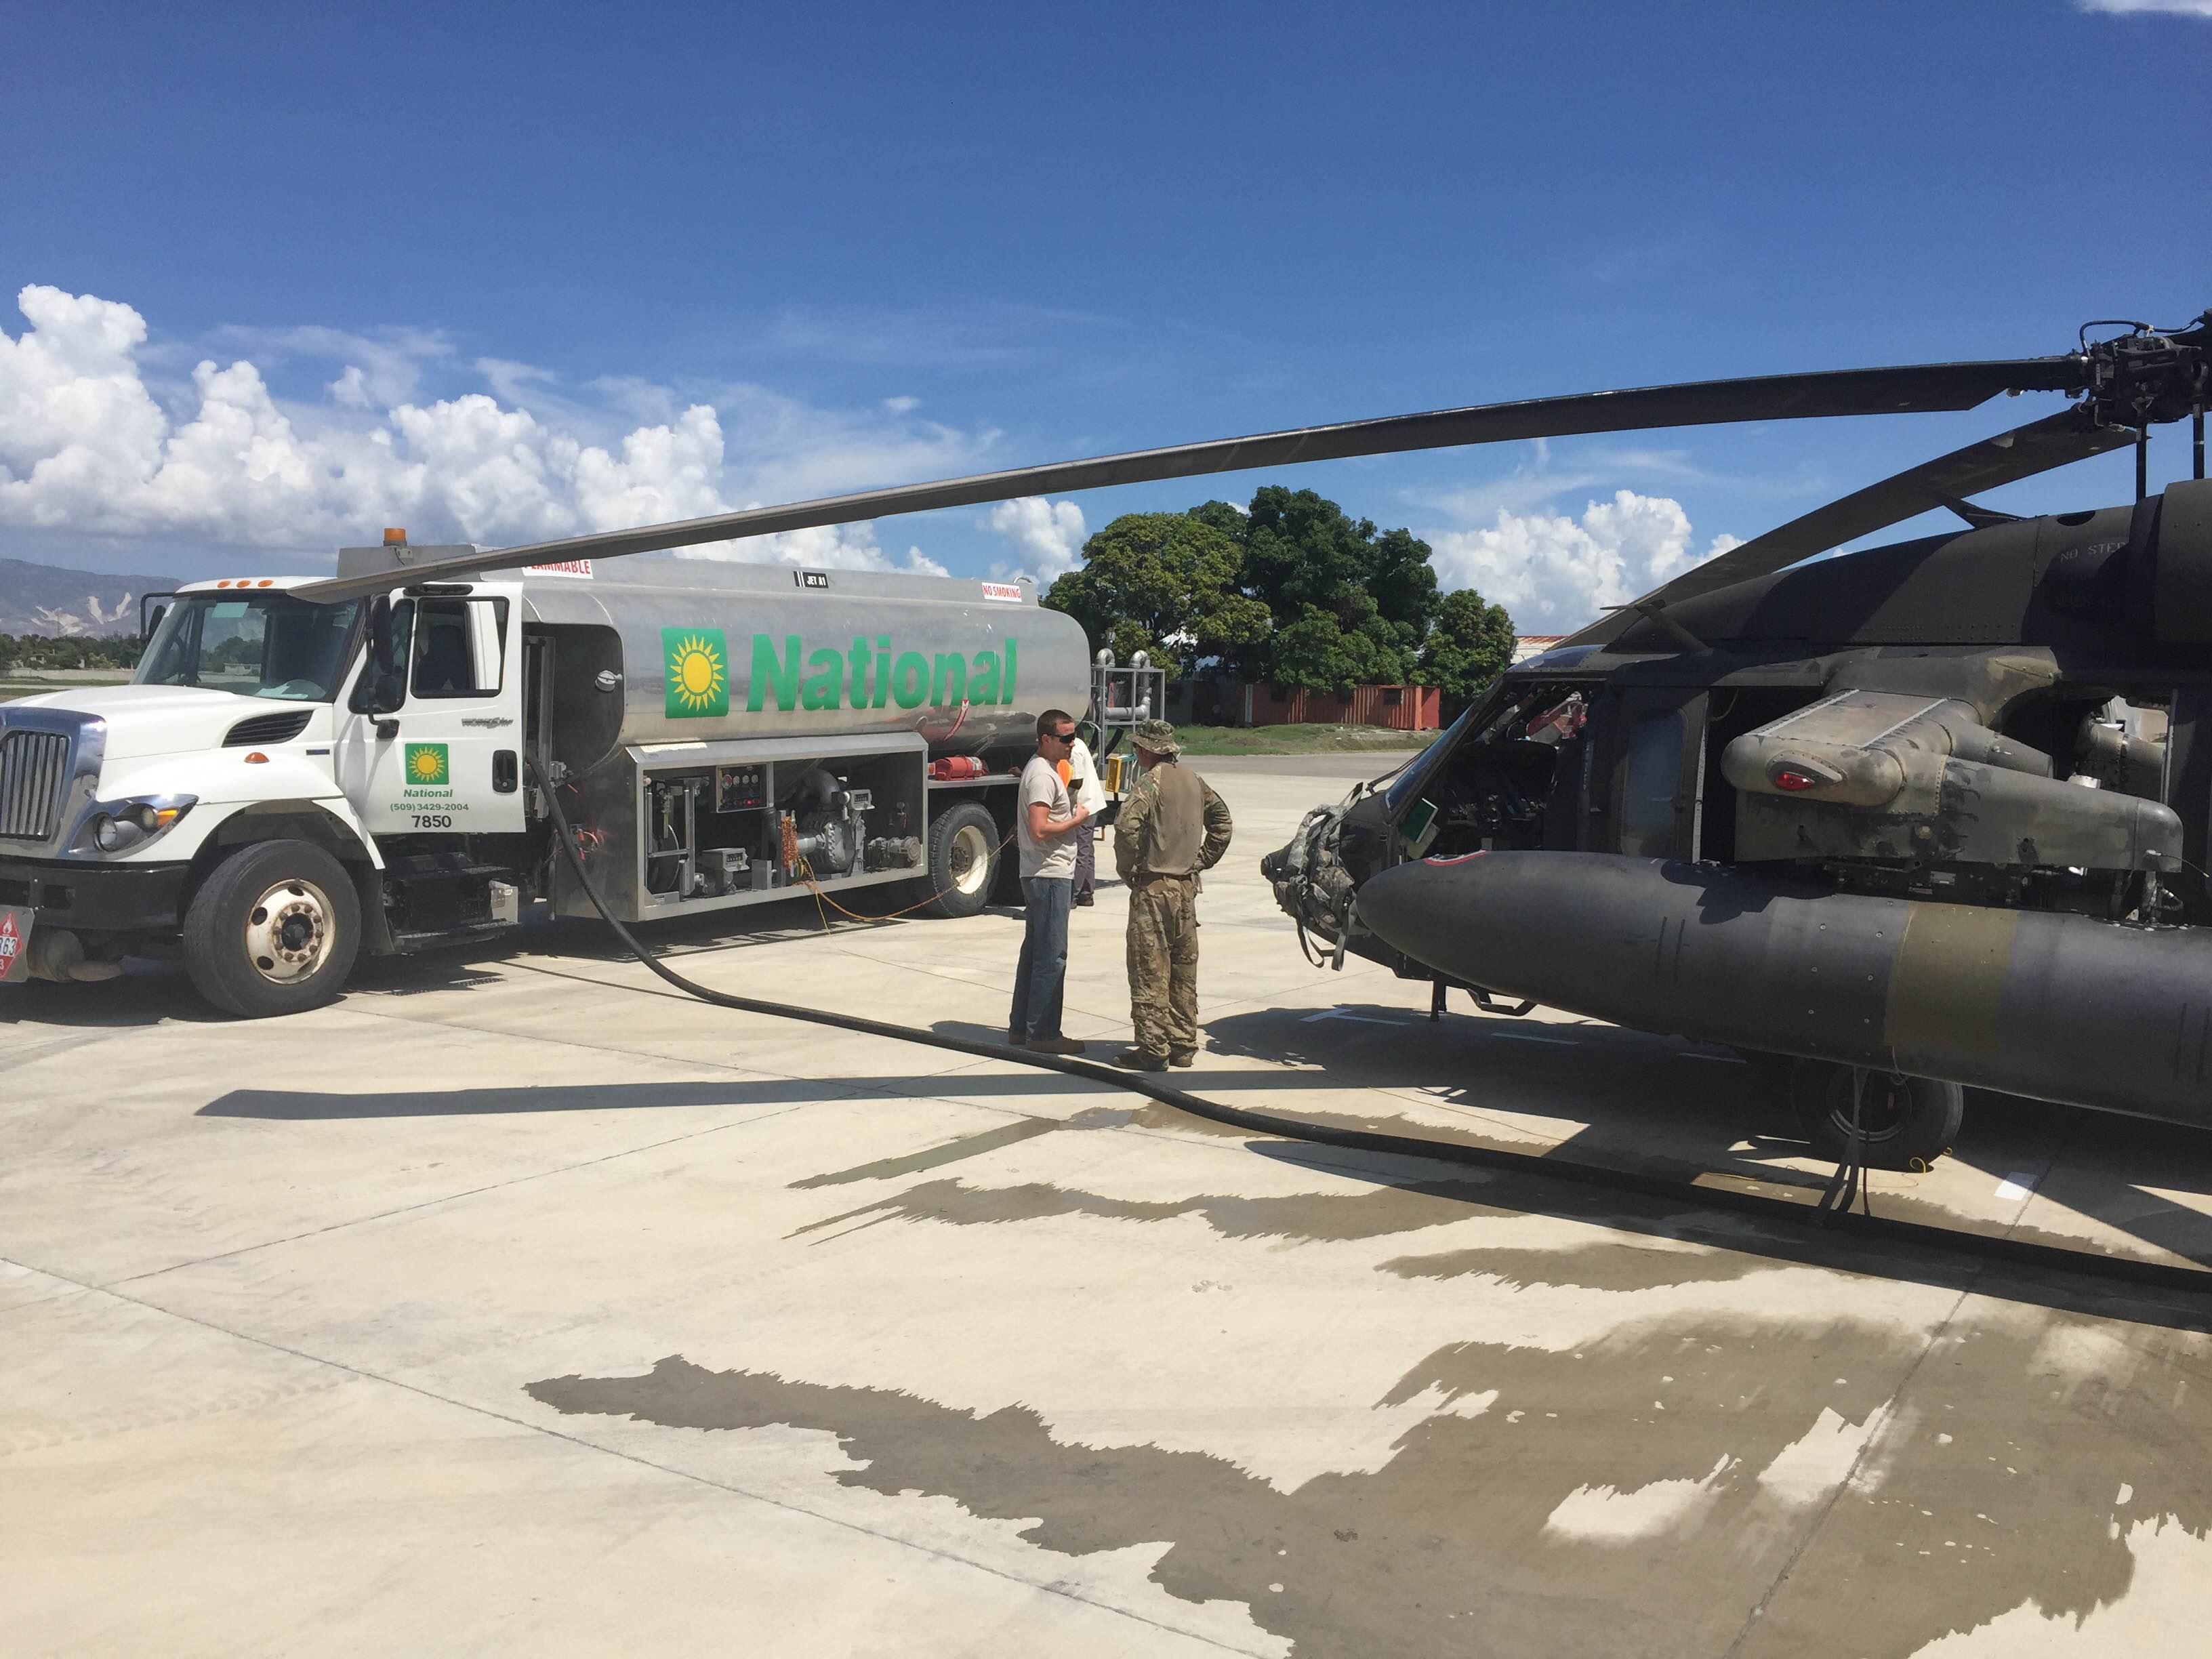 On landing pad, civilian, U.S. Army pilot in conversation between parked fuel truck and Army helicopter